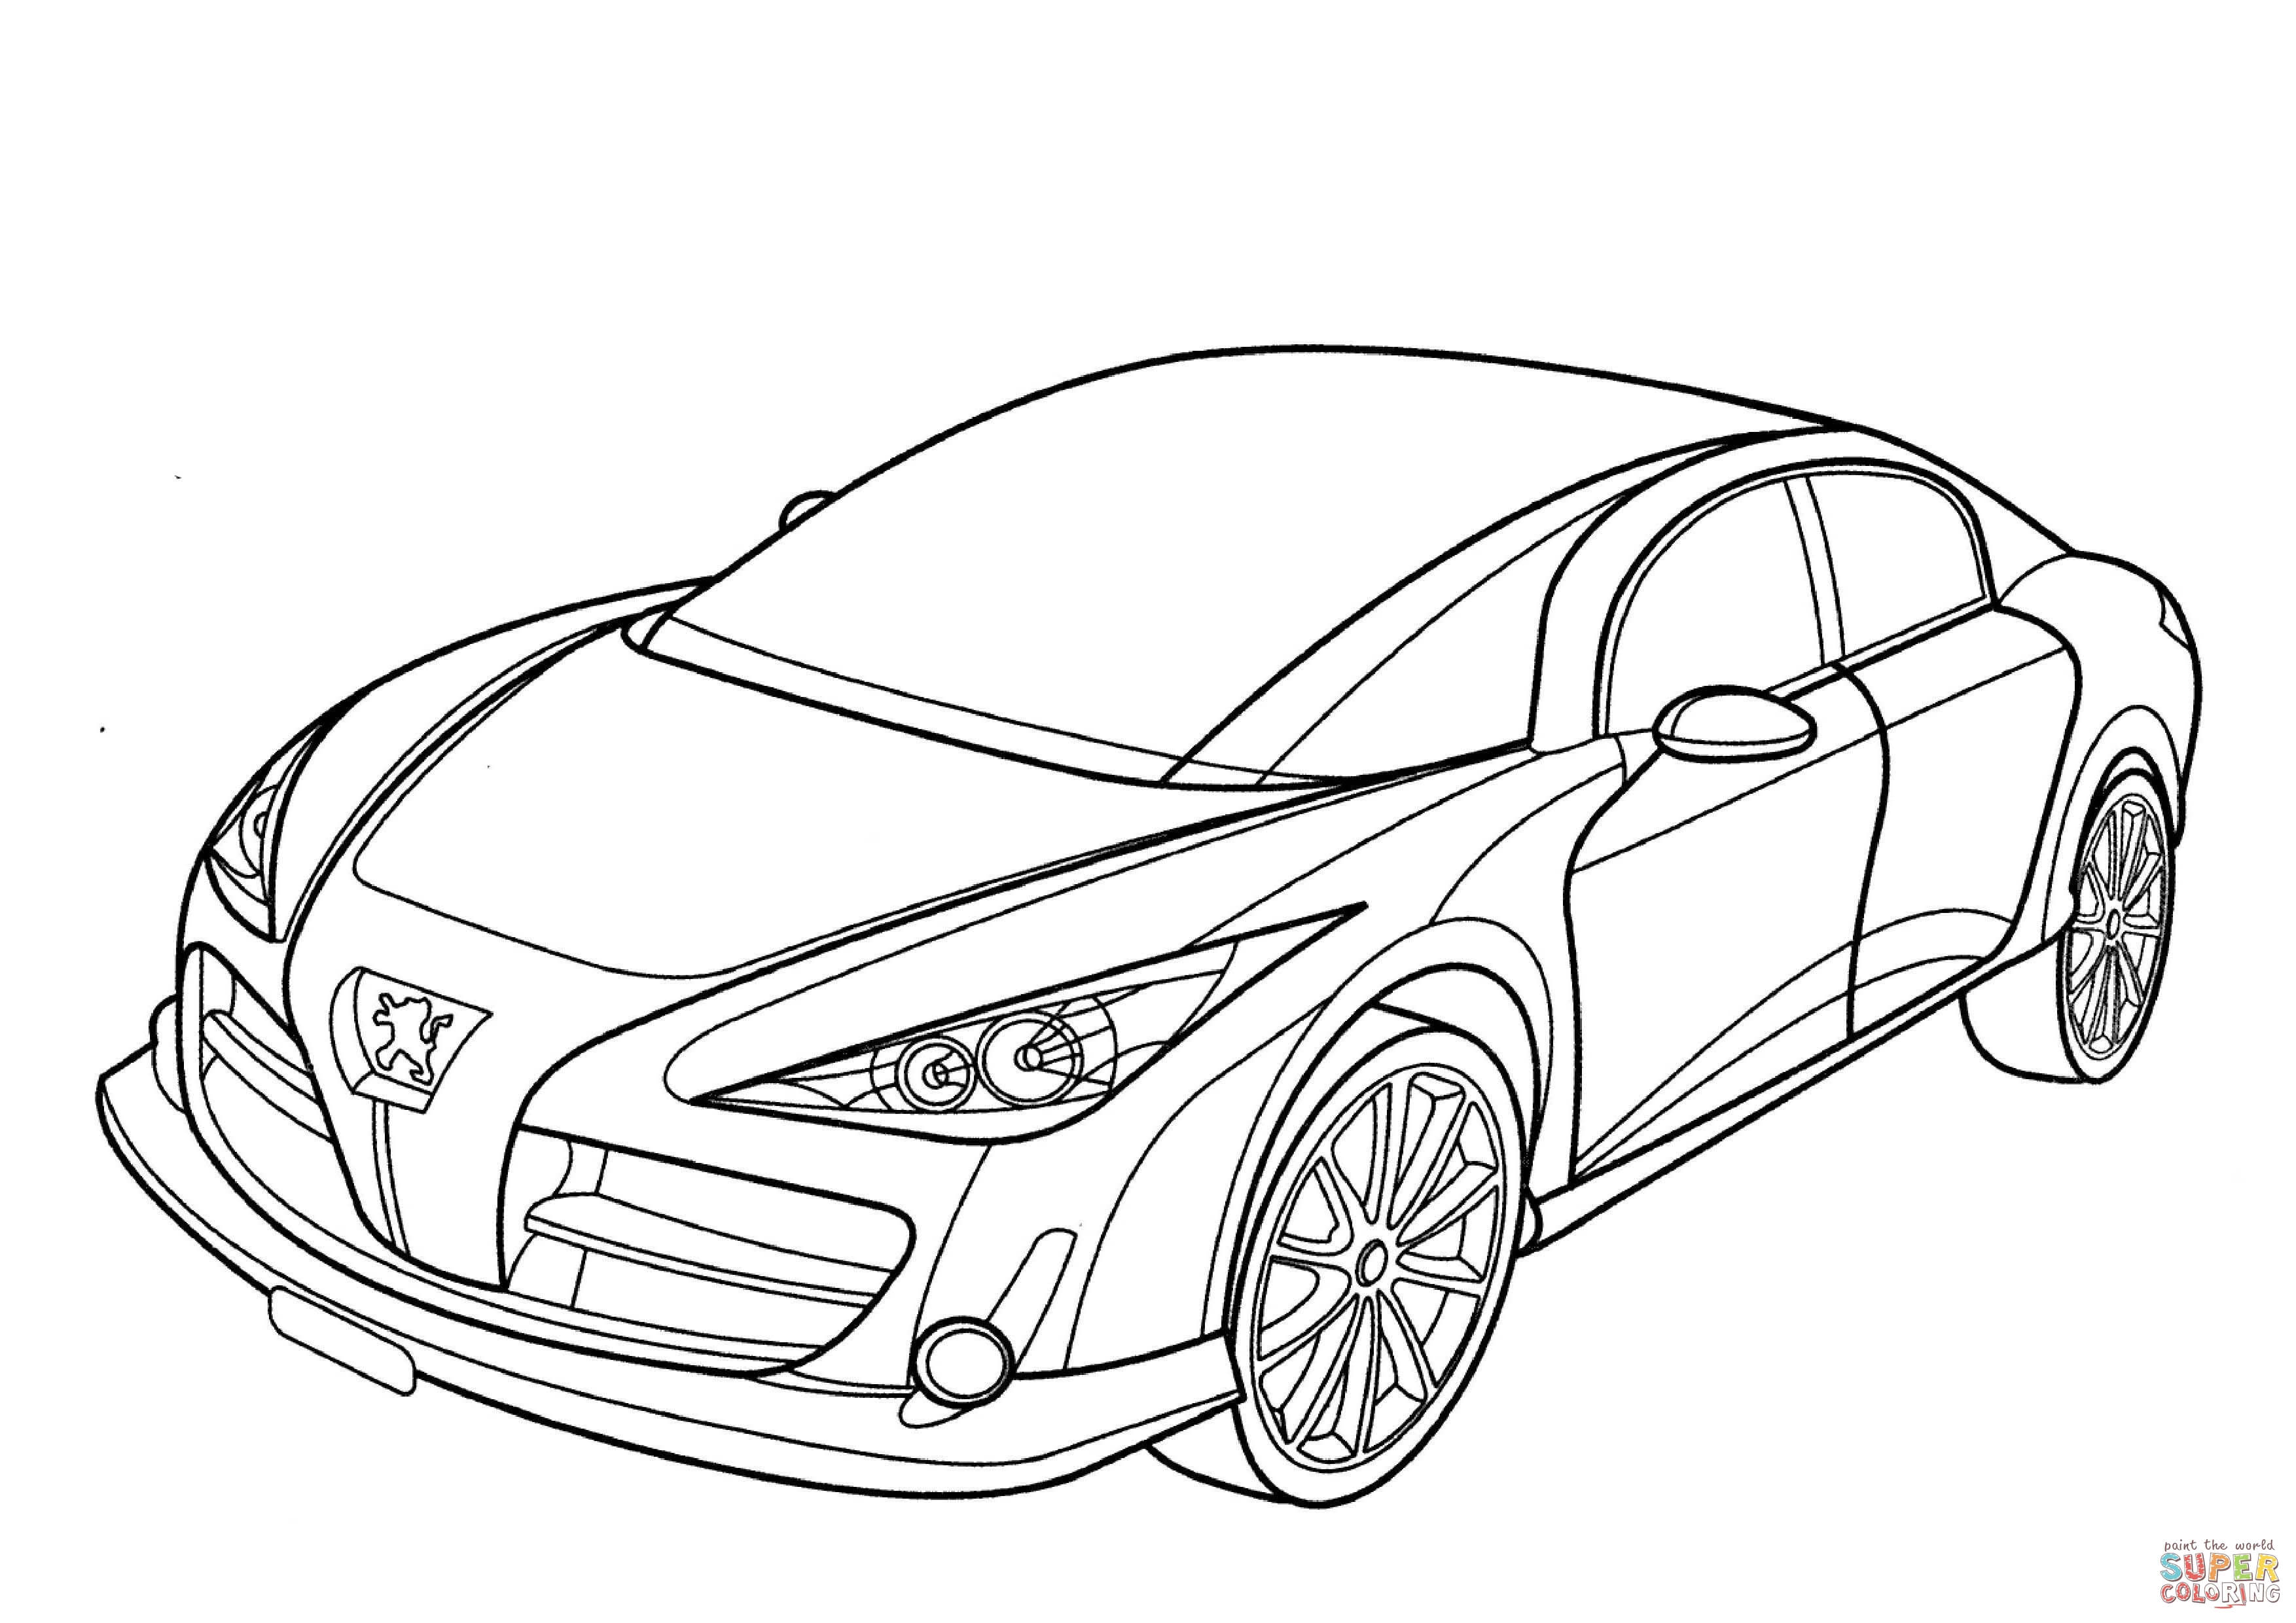 Peugeot RC Coloring Page | Free Printable Coloring Pages - Coloring Home